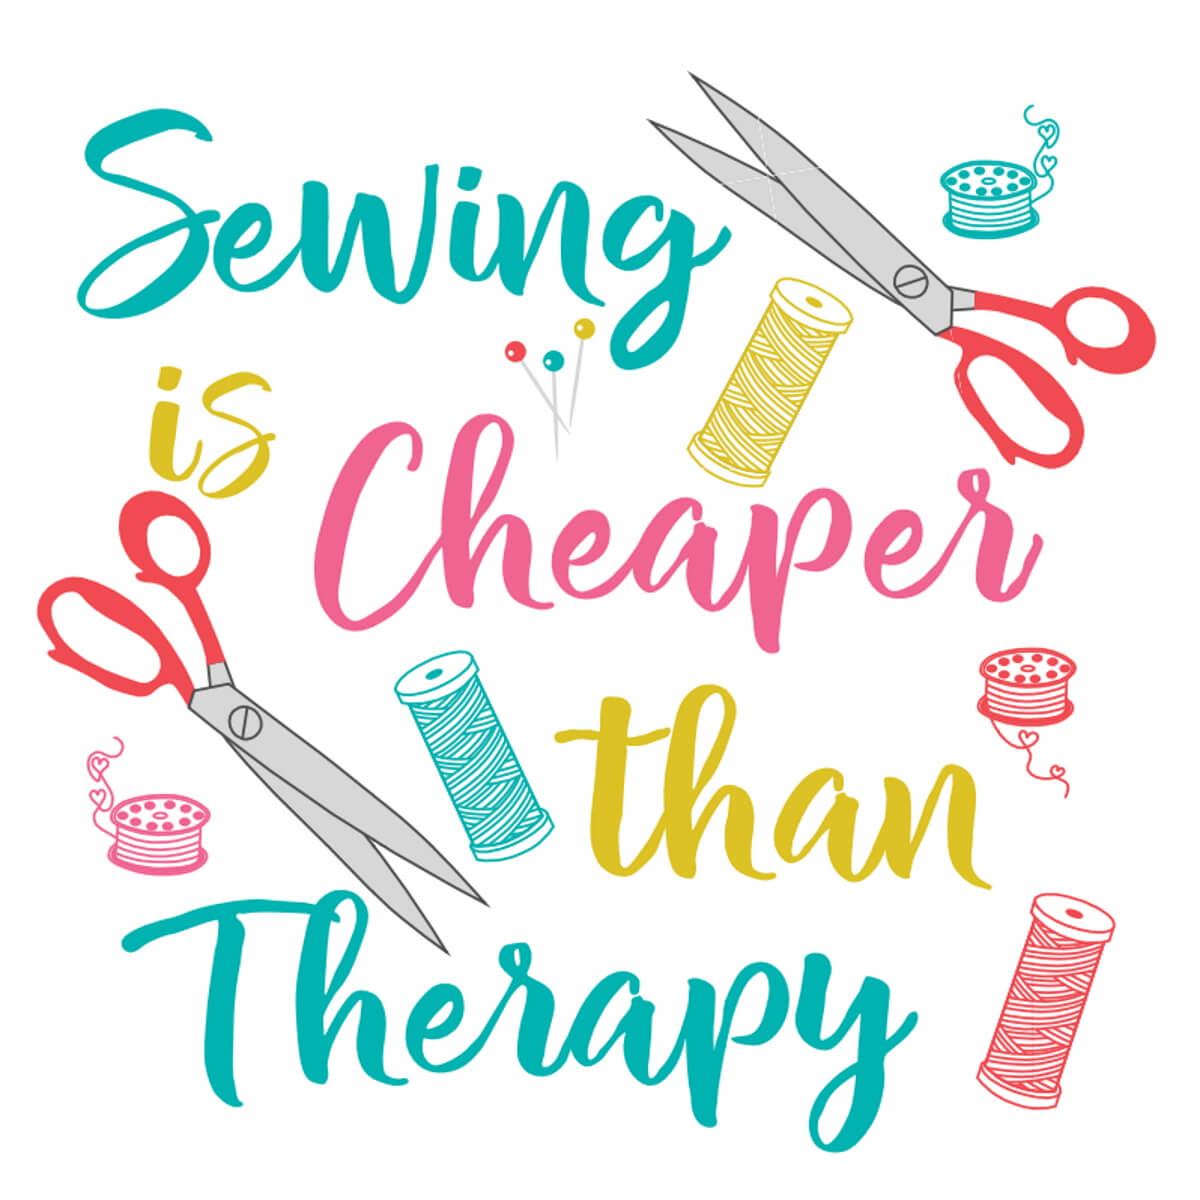 Stickdesign Love to Sew: Sewing Therapy (Download)